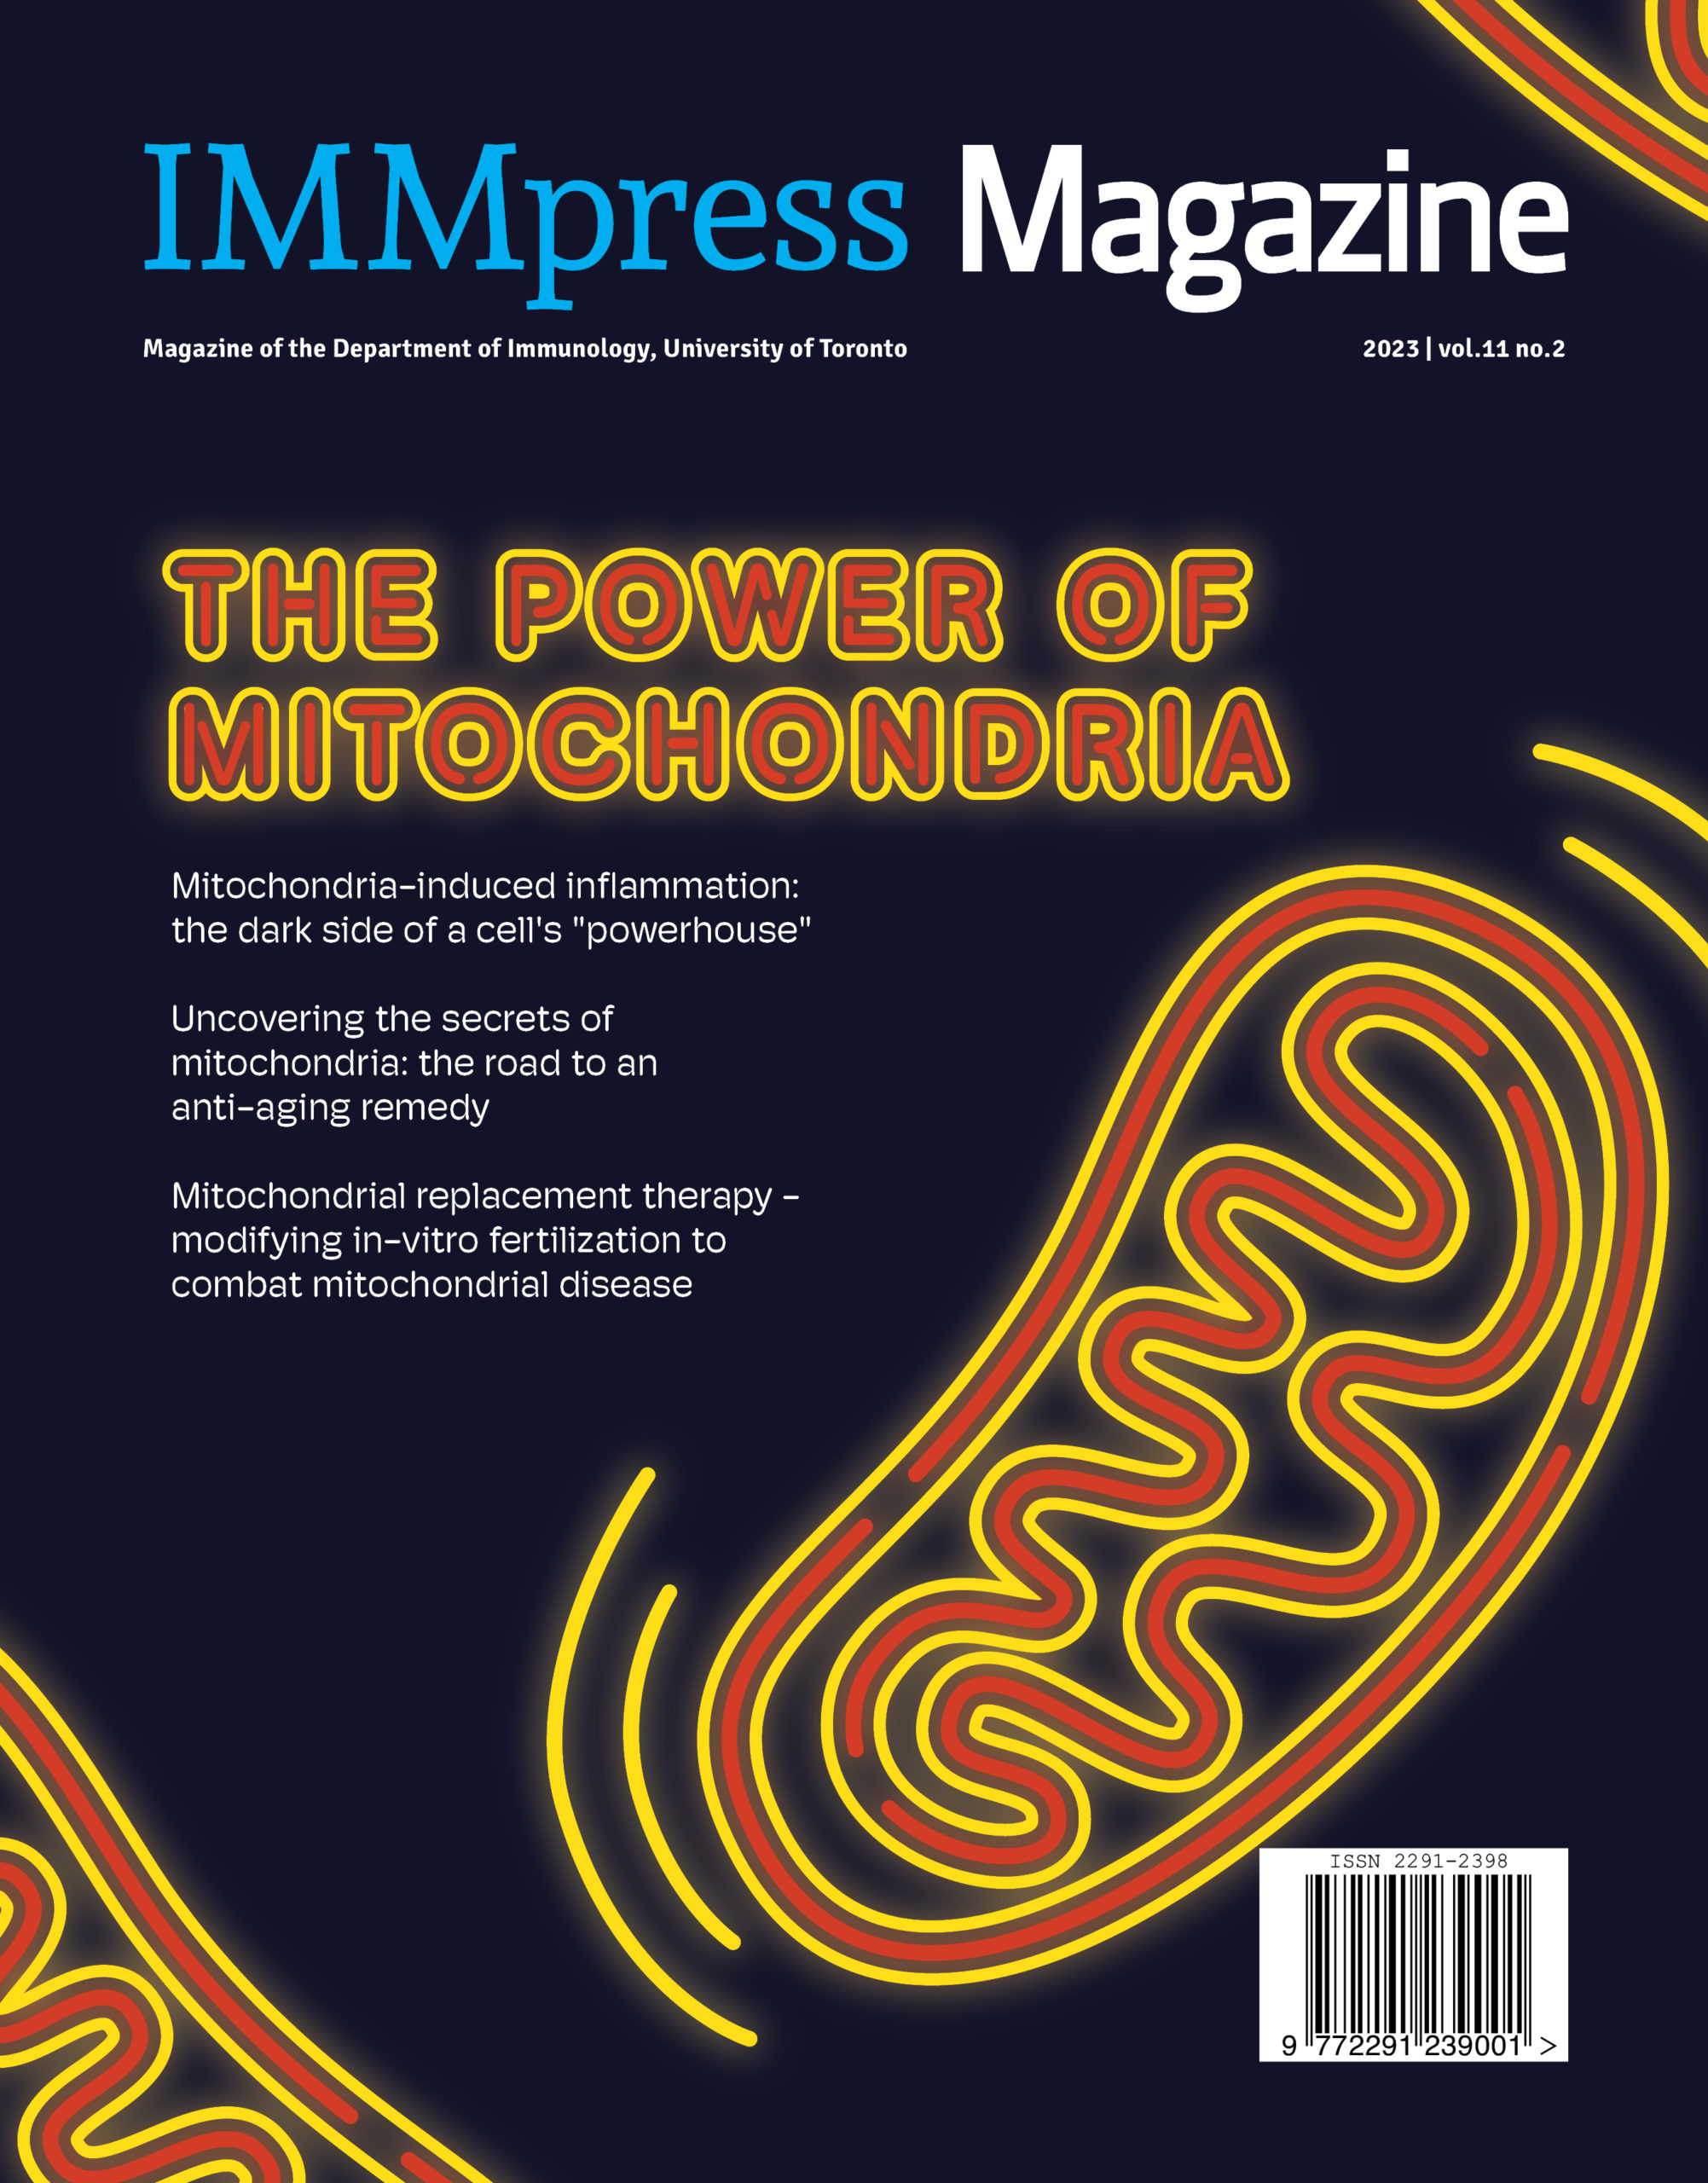 IMMpress Volume 11 Issue 2, 2023 – Cover